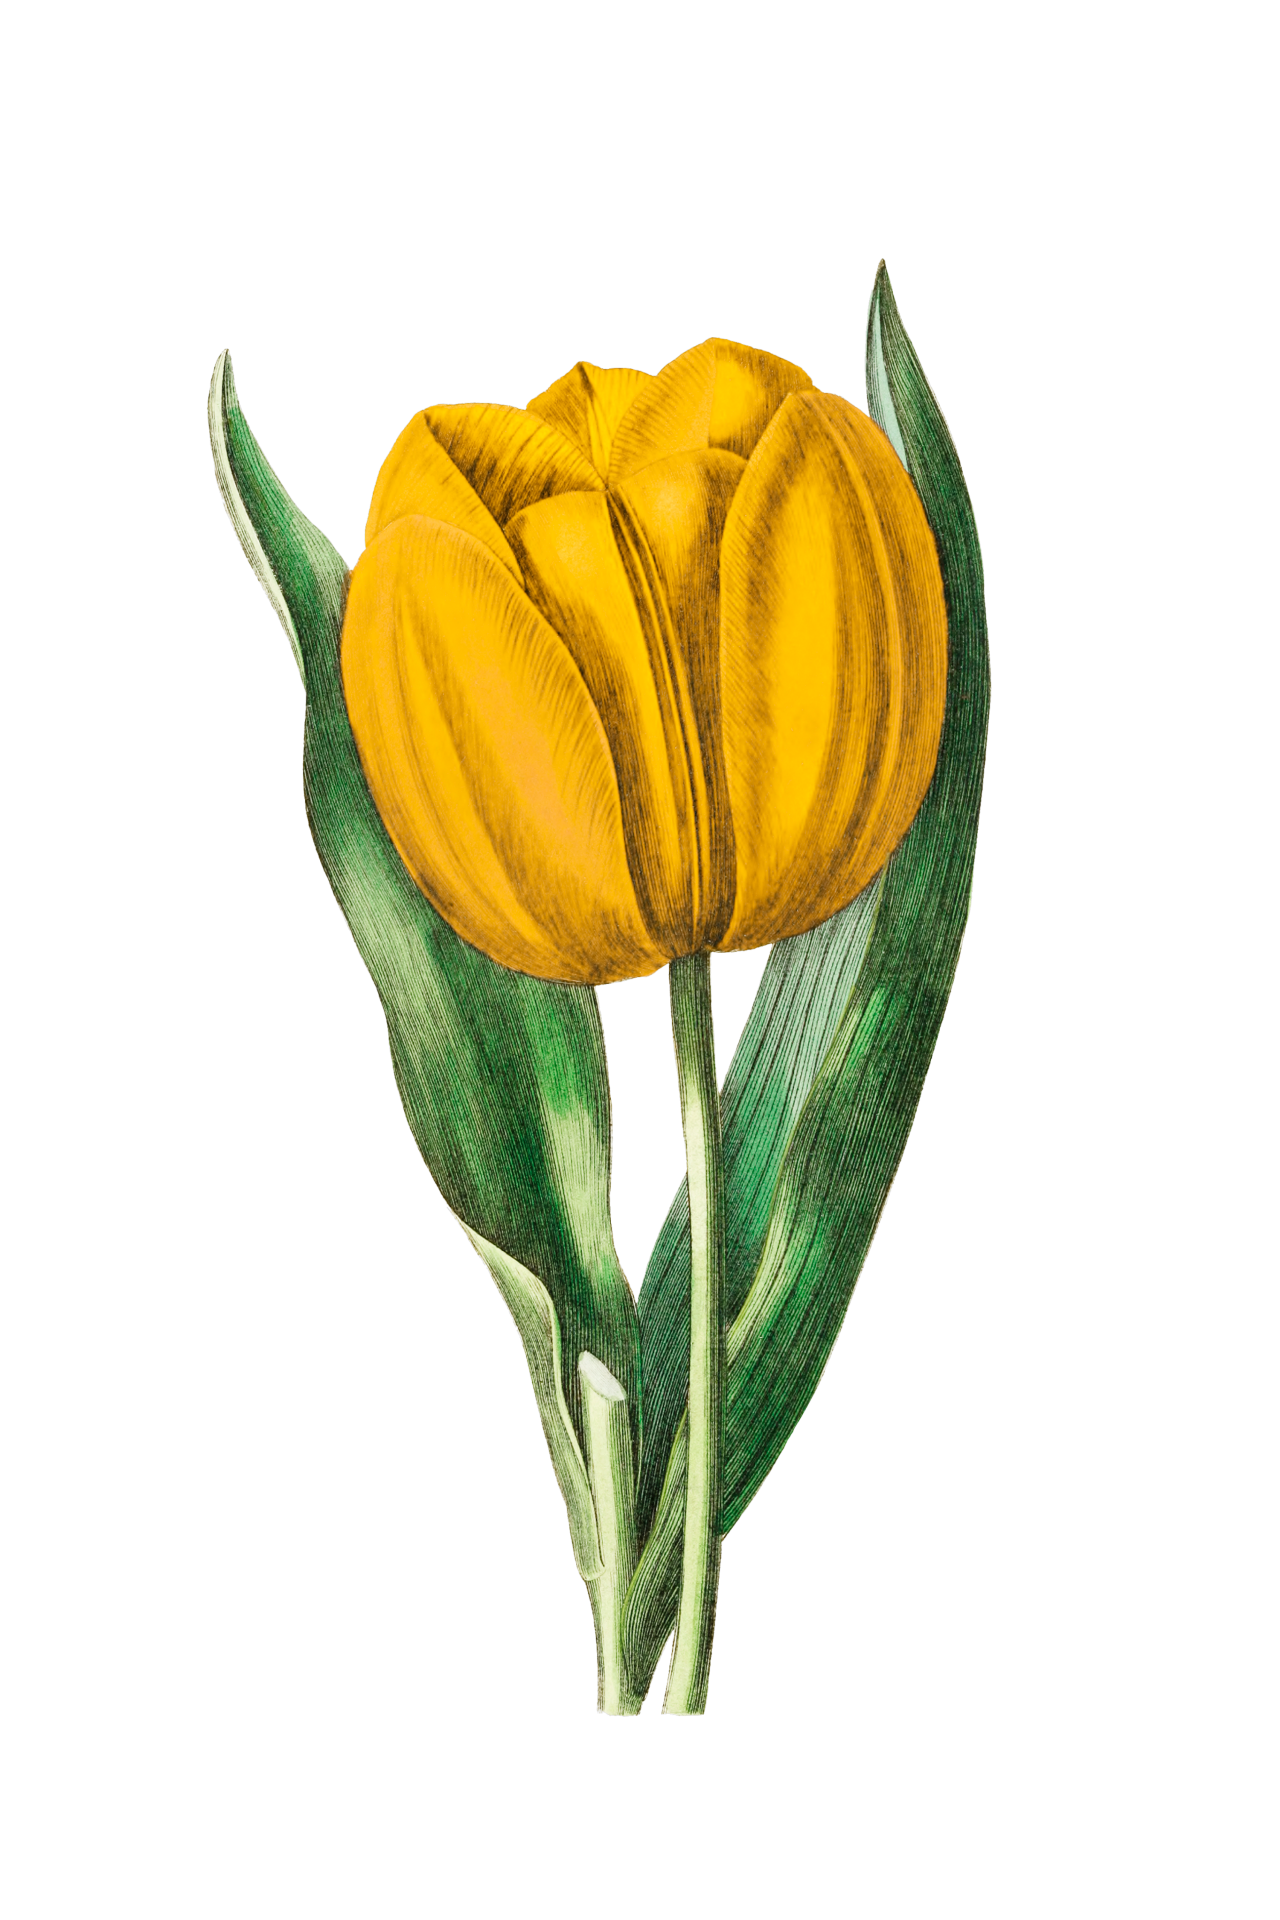 Flower Tulip Yellow Blossom Illustration Graphic Clip Art with Transparent Background PNG File Vintage Sticker Spring Time Easter Motif Decorative